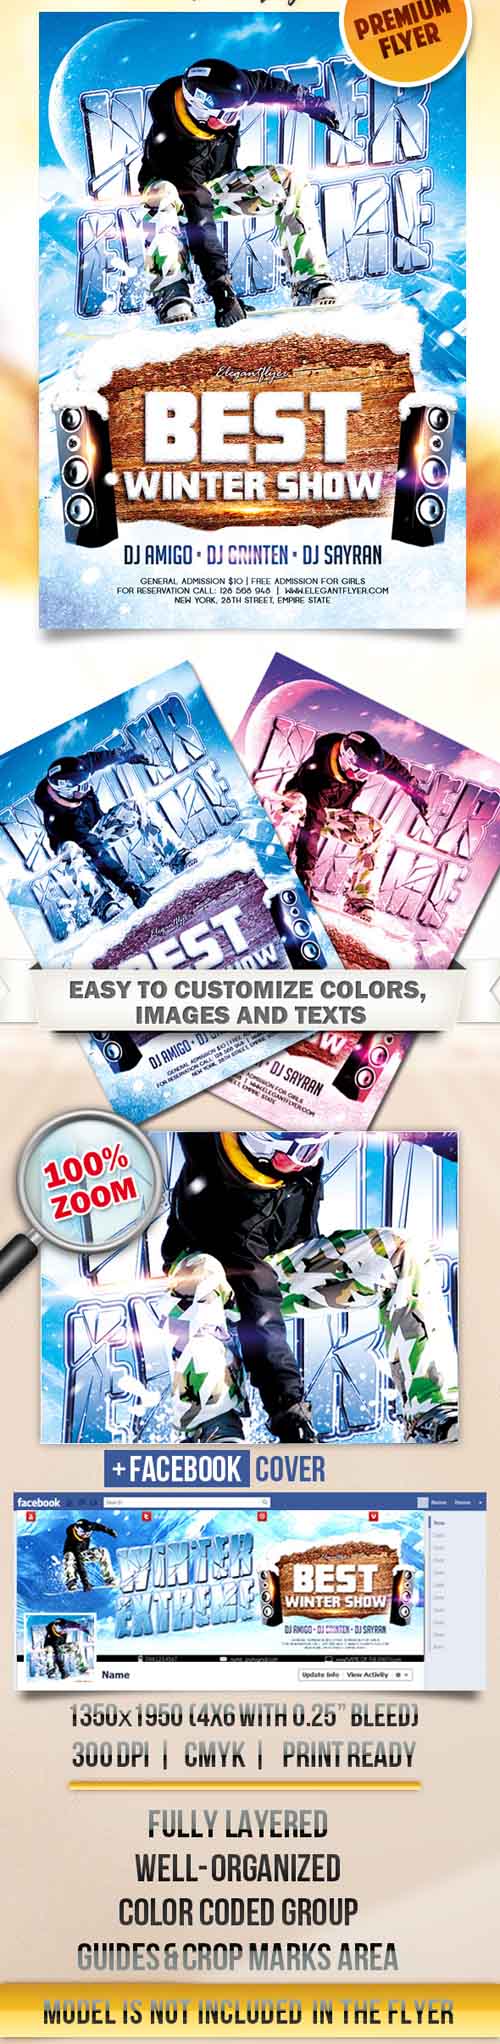 Flyer PSD Template - Winter Extreme + Facebook Cover 6